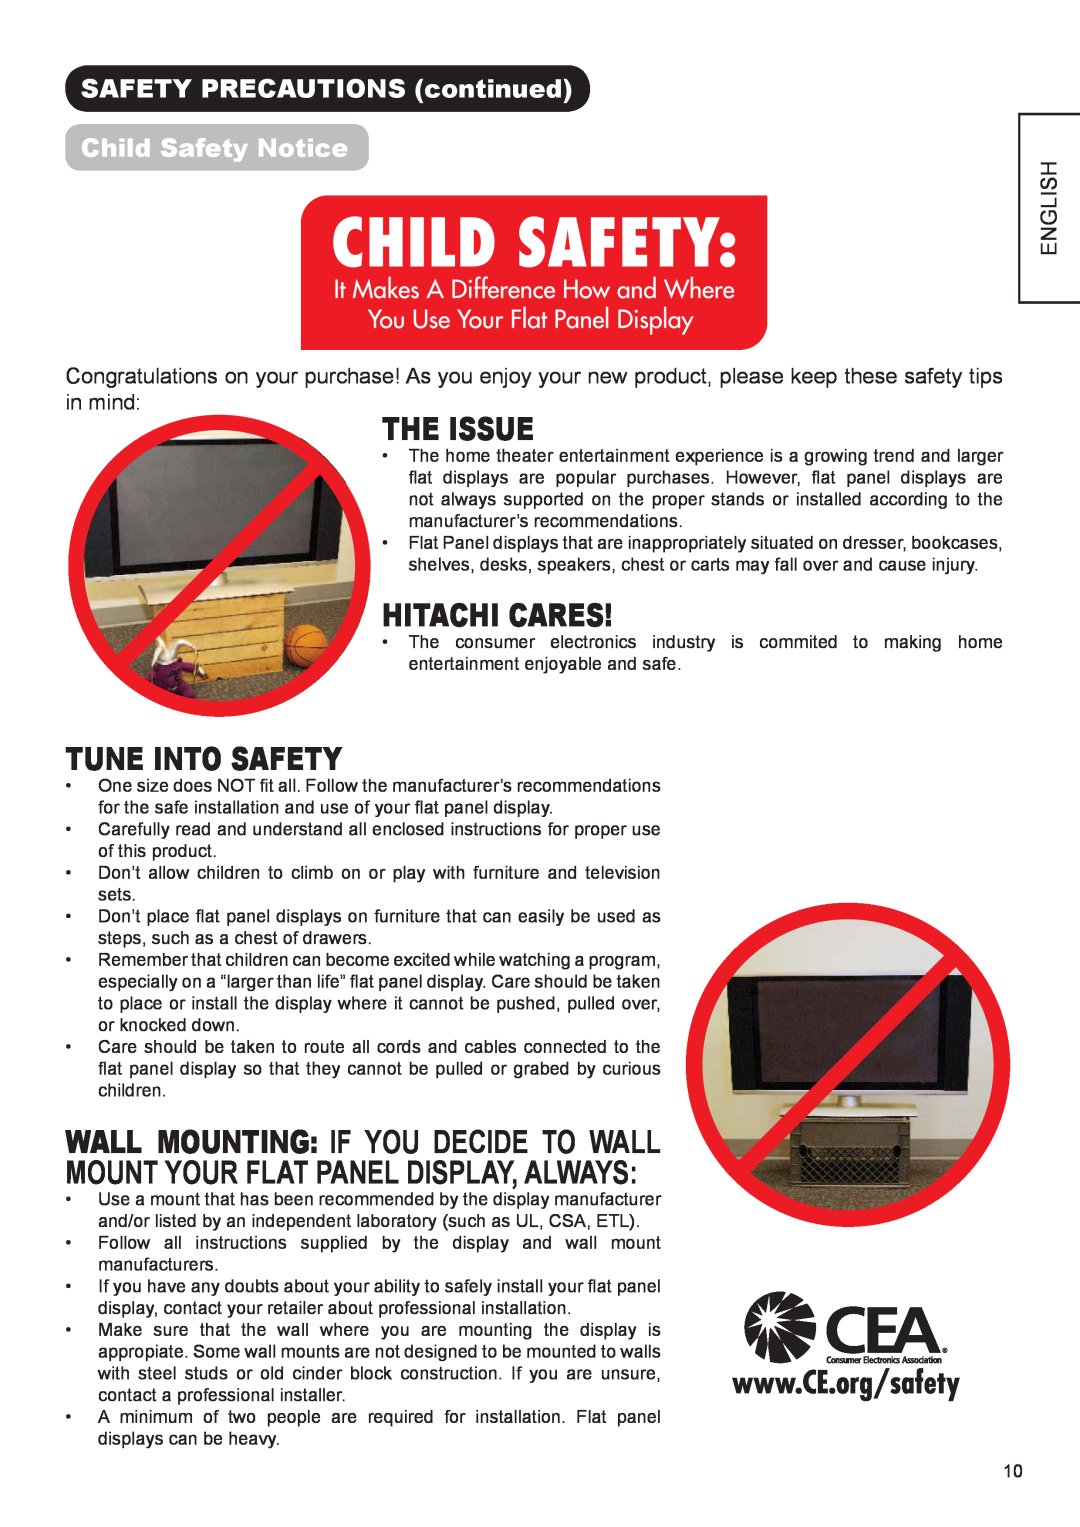 Hitachi UT32A302W manual SAFETY PRECAUTIONS continued Child Safety Notice, Hitachi Cares, Tune Into Safety, English 